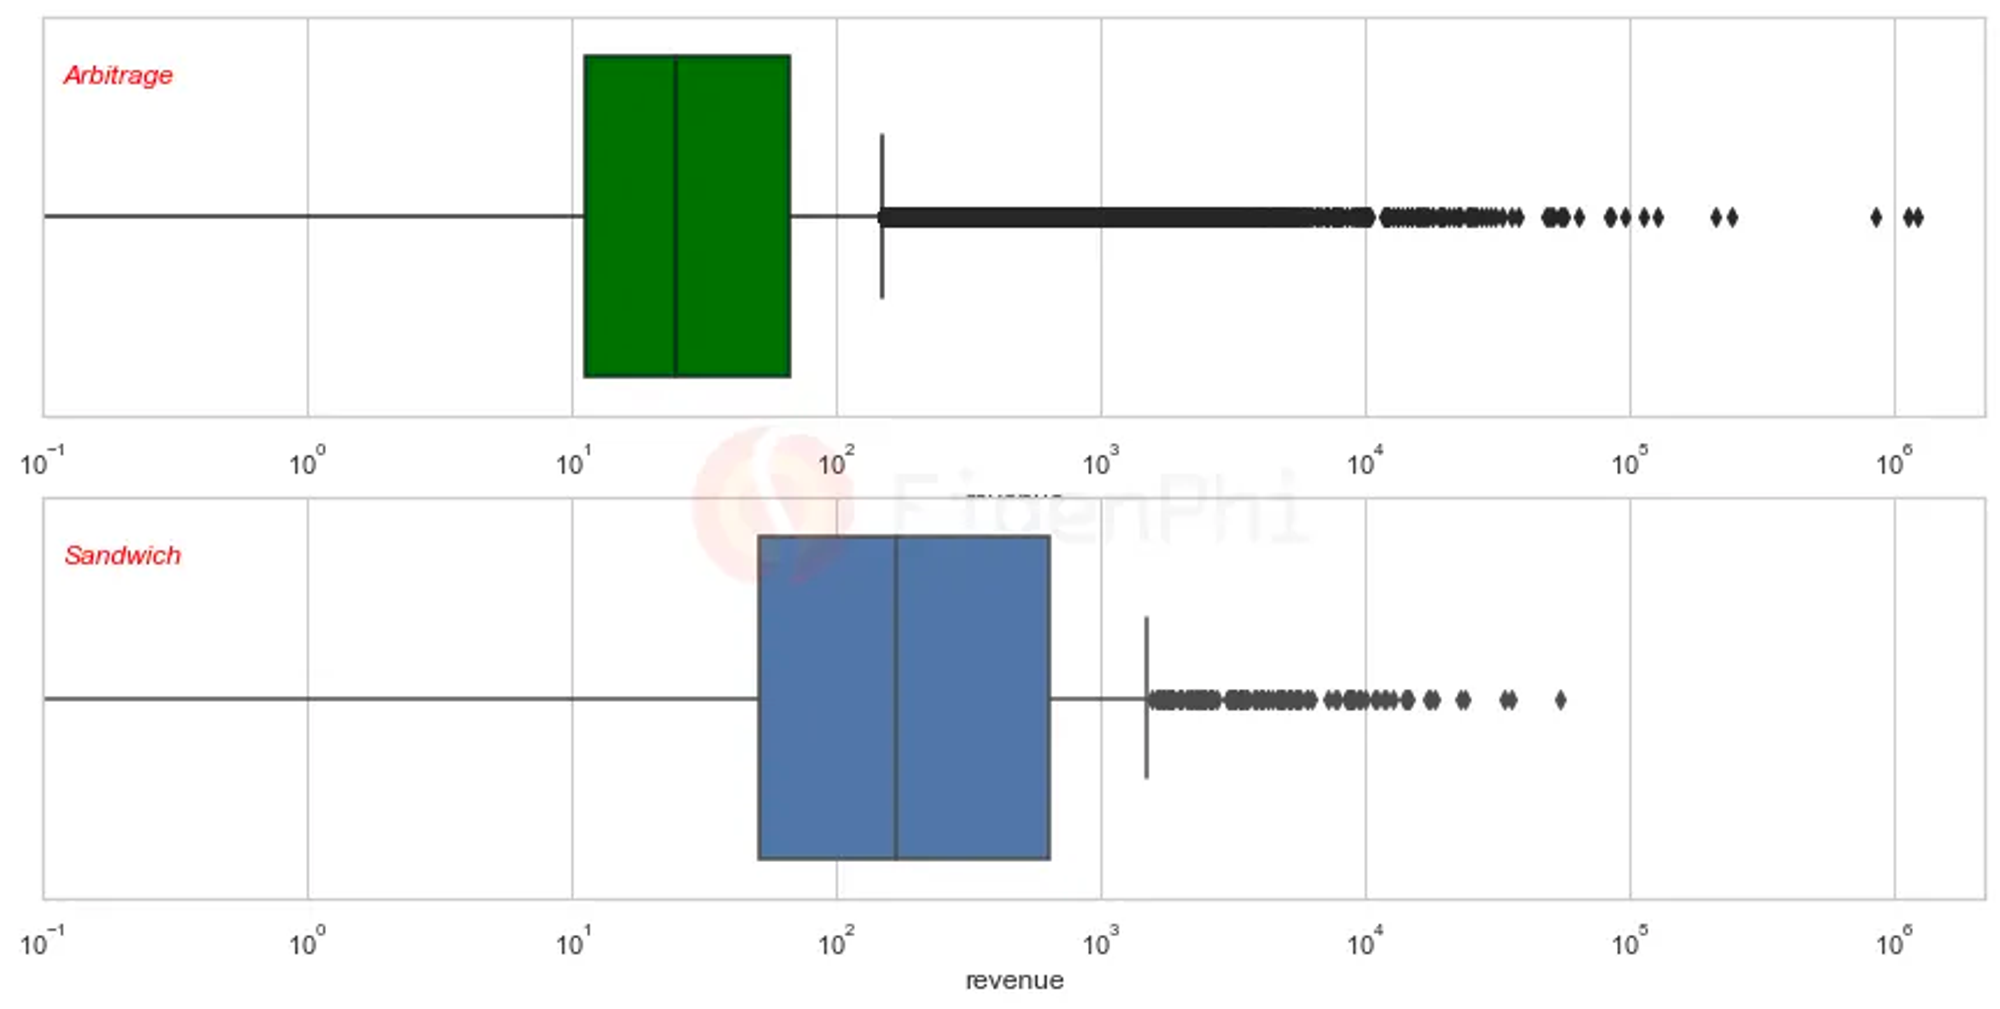 Box plot of income distribution for arbitrage and sandwich (The box body represents the quartile, the middle line represents the median). Source: EigenPhi